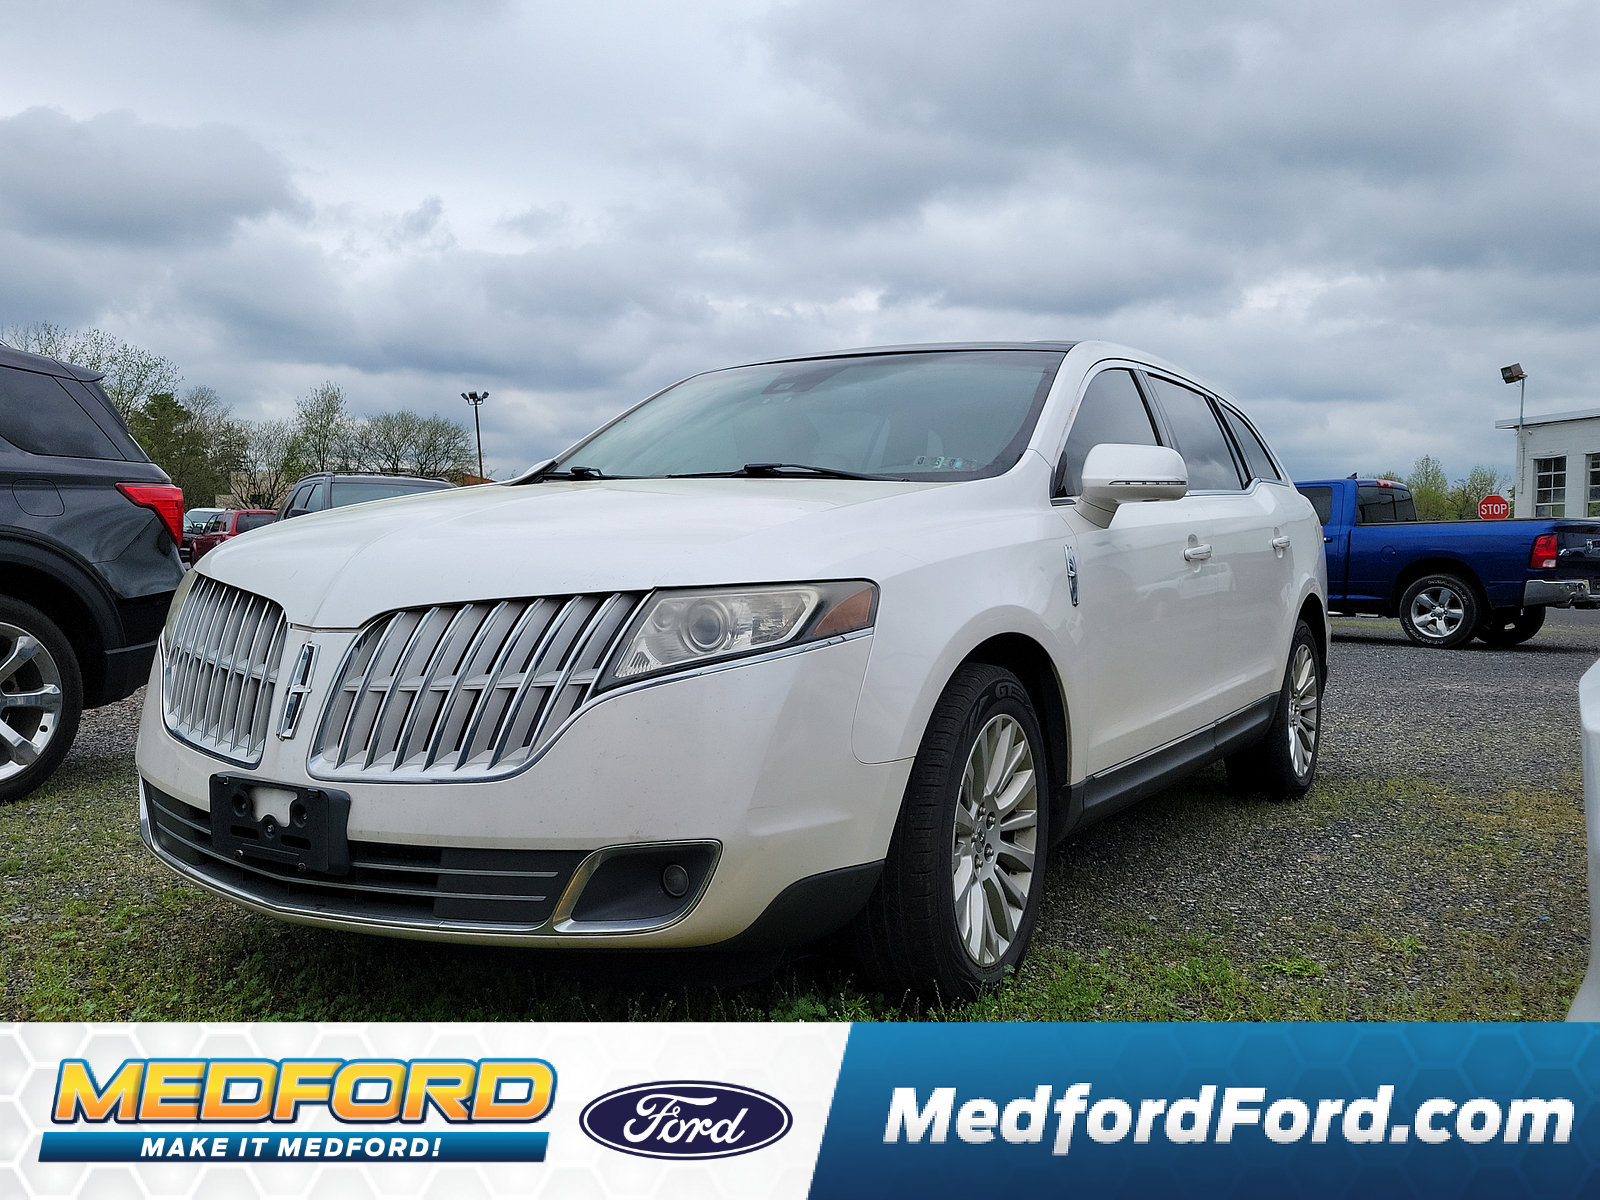 Pre-Owned 2010 Lincoln MKT 4 Door SUV in Medford #23062A | Medford Ford